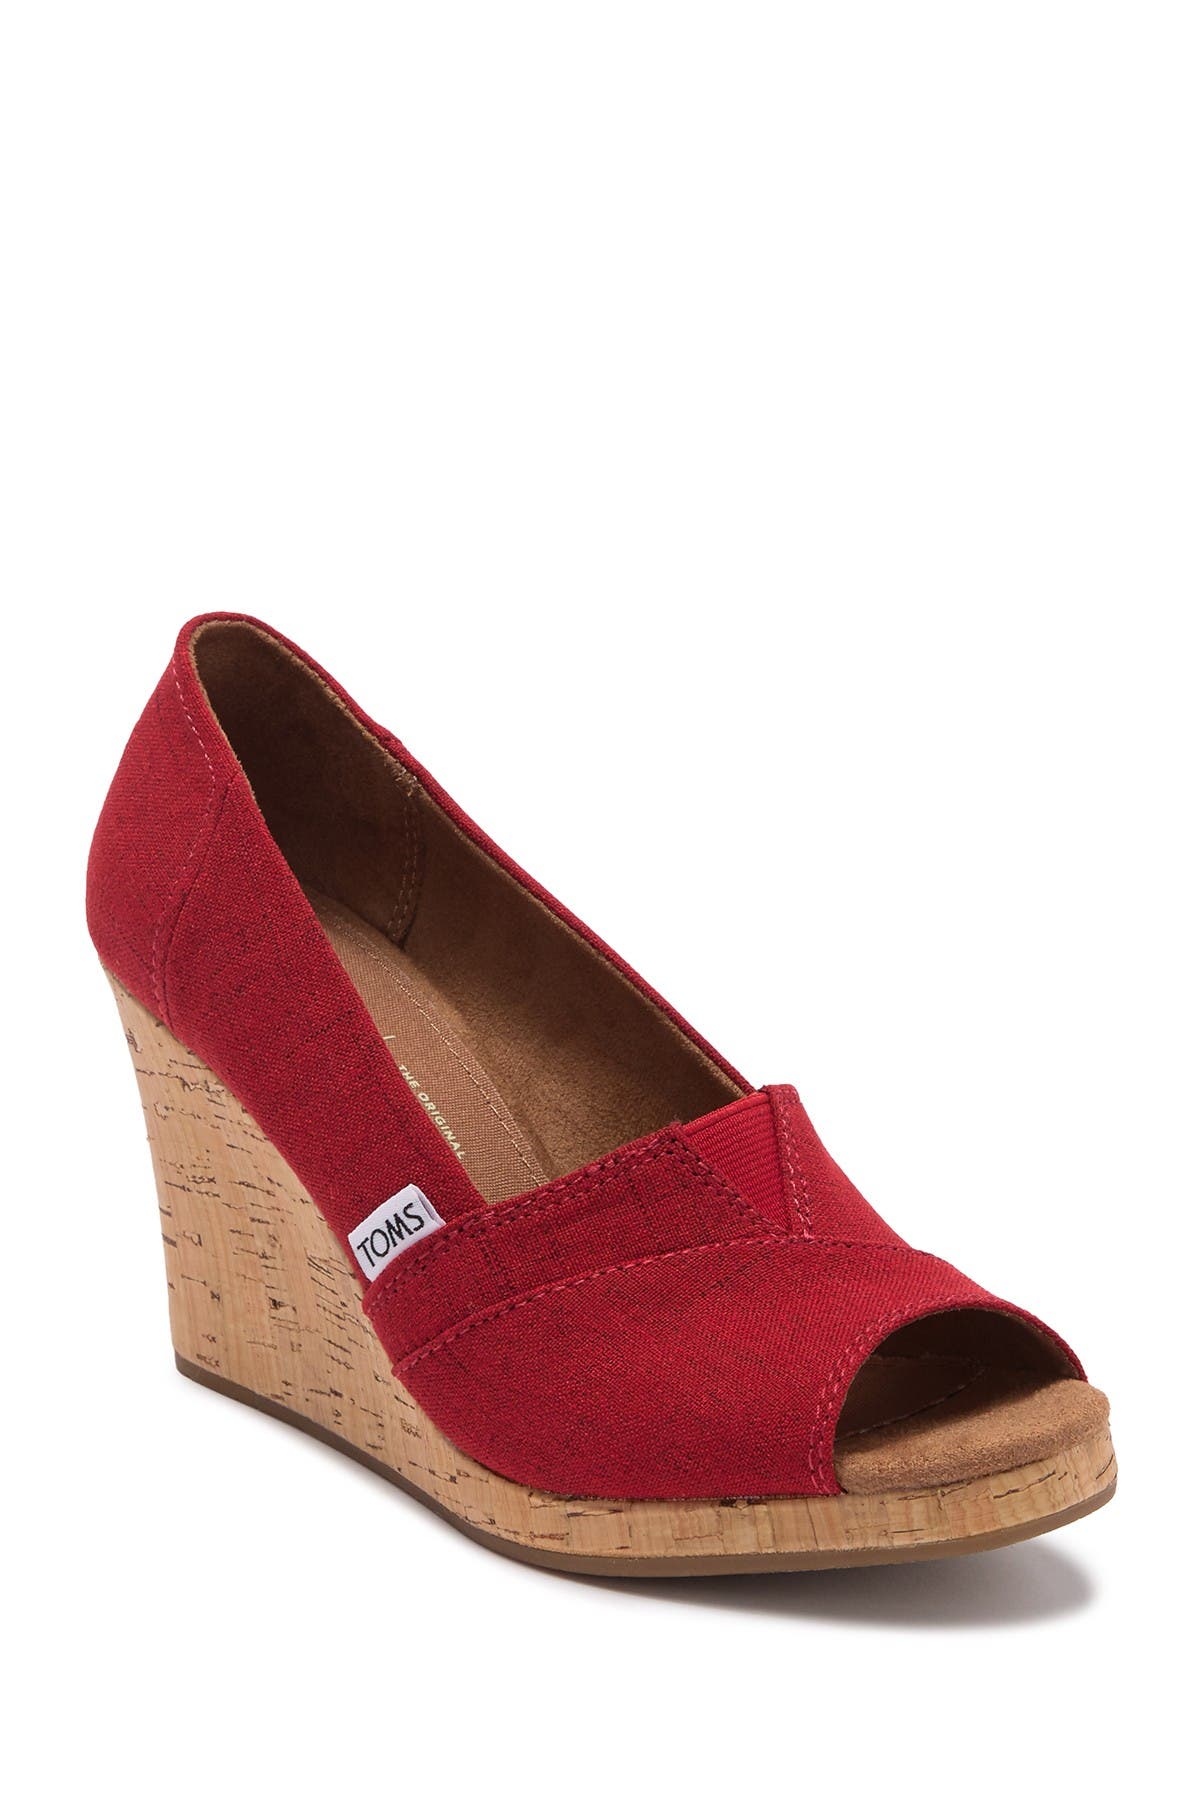 toms red wedge shoes